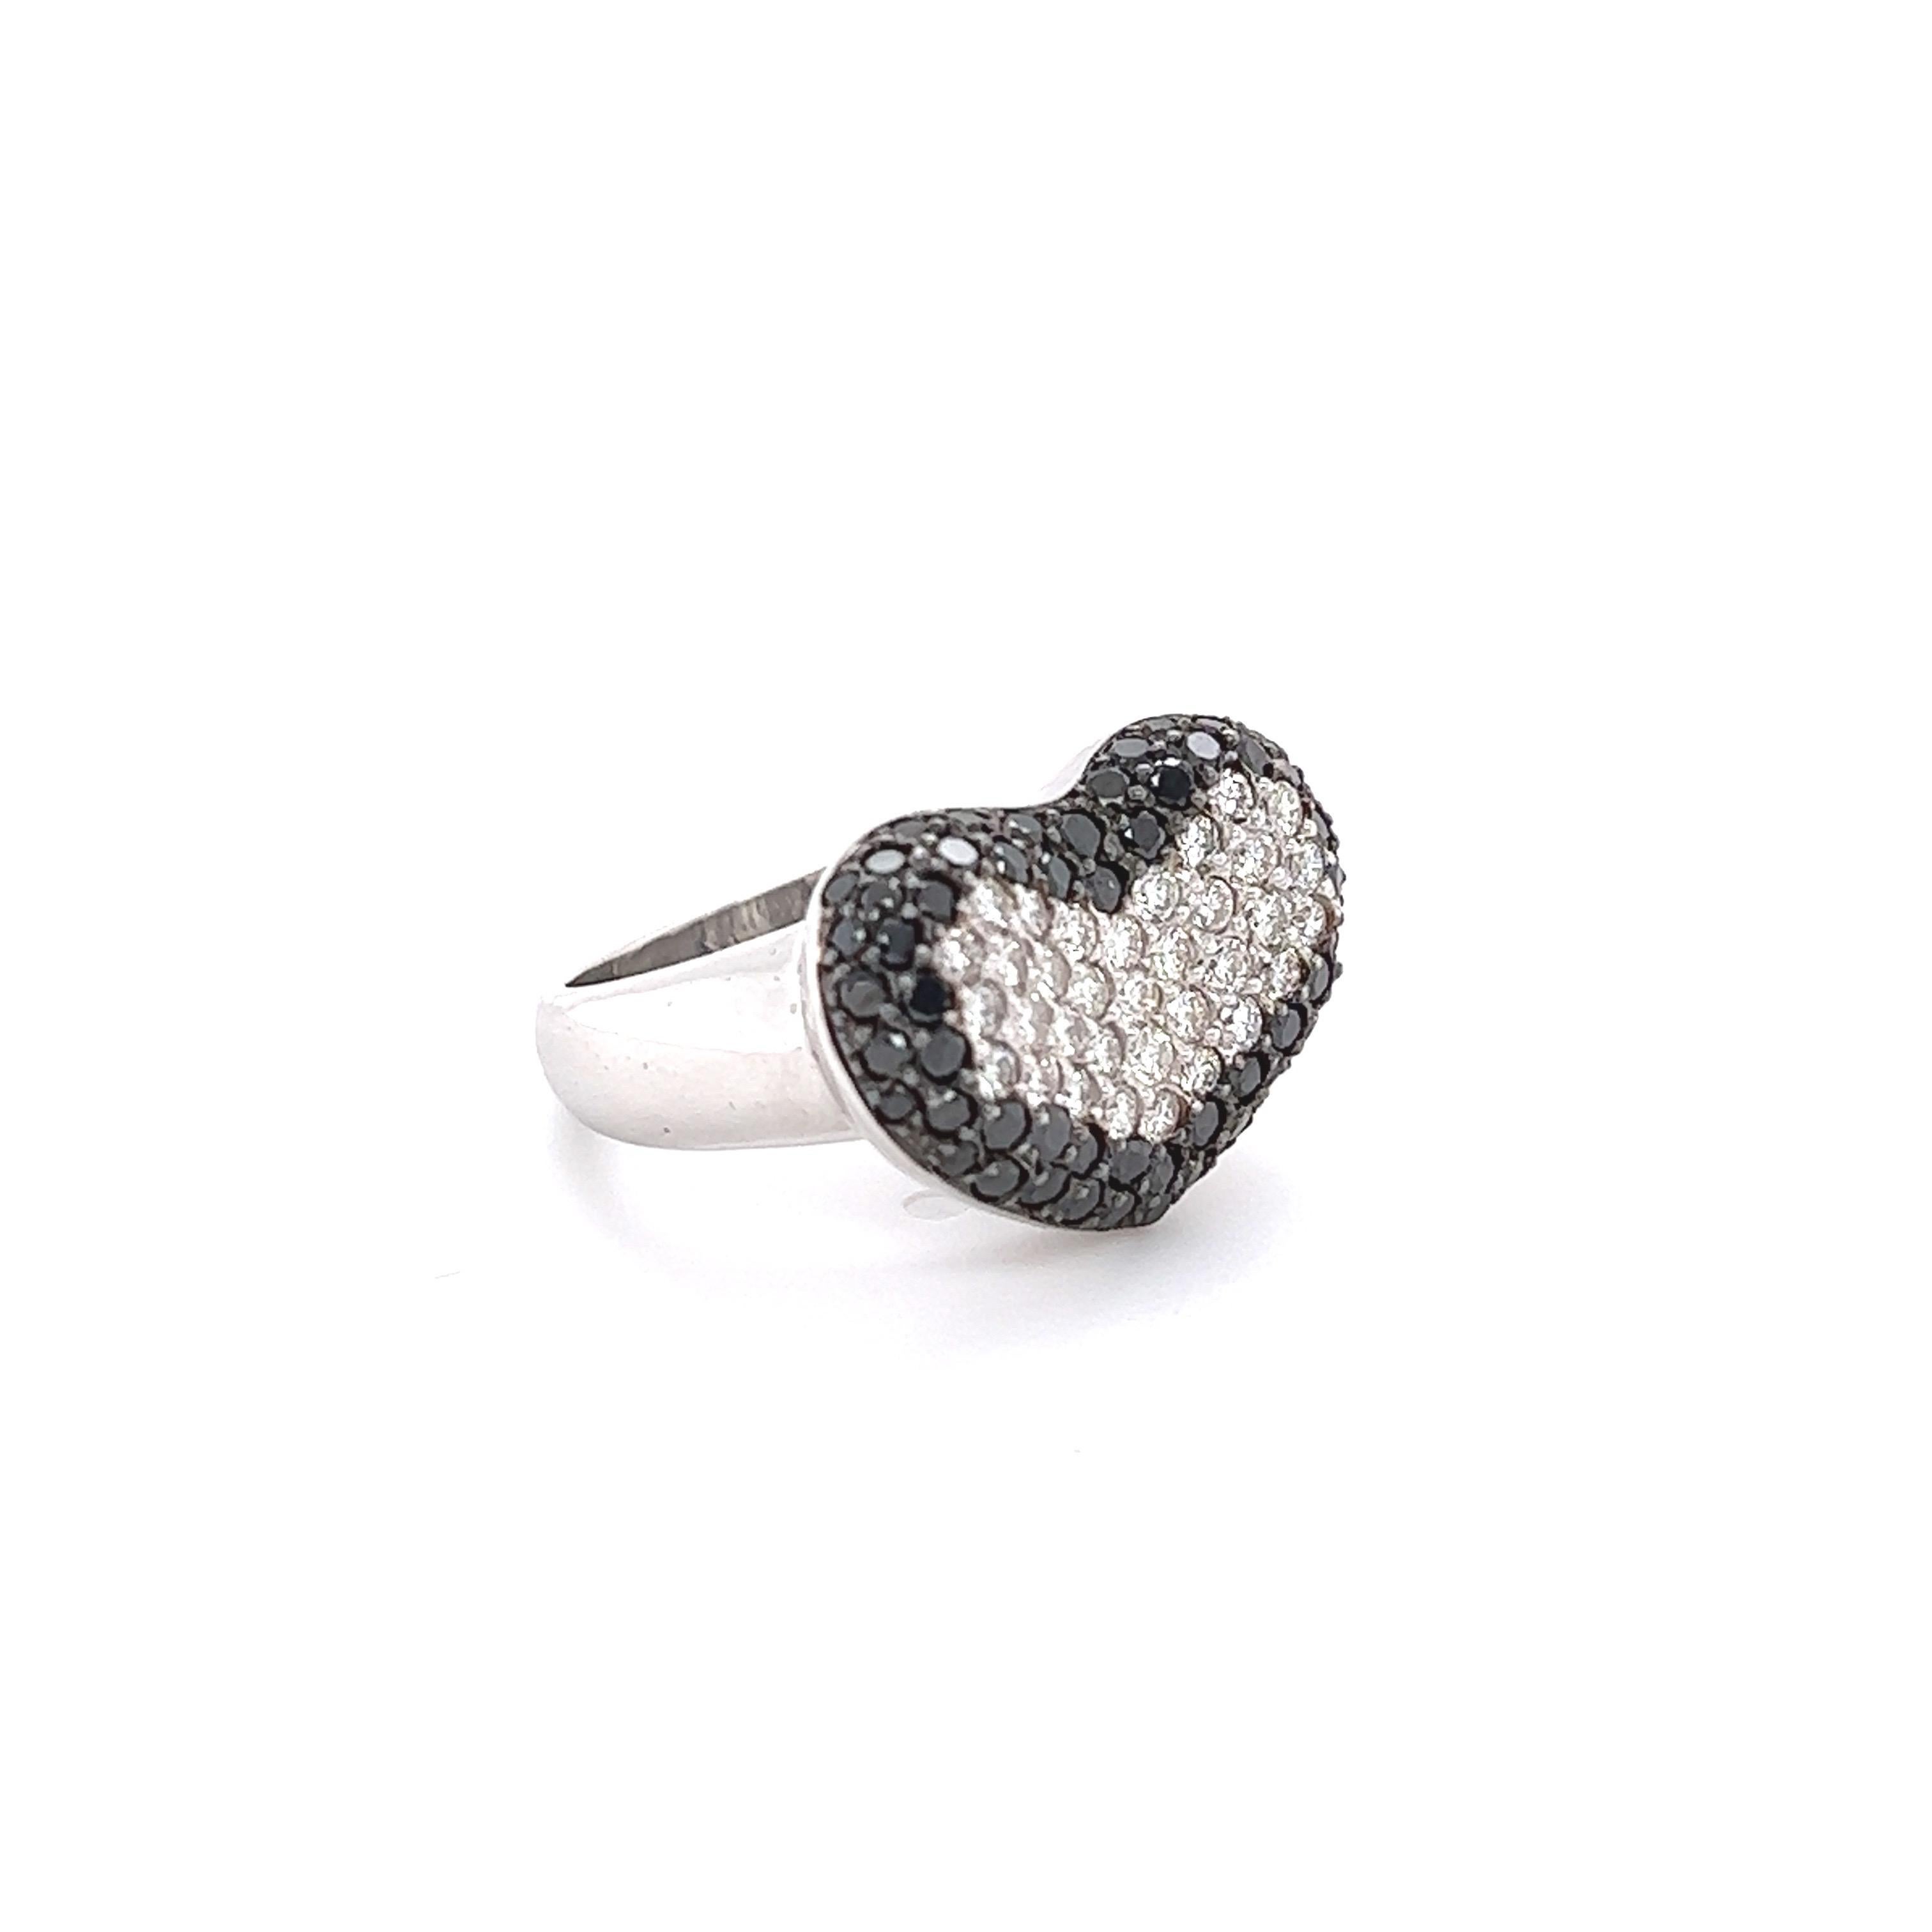 The 60 Round Cut Natural Black Diamonds are 1.21 Carats and also holds 34 Natural Round Cut White Diamonds weighing 0.70 Carats. The total carat weight of the ring is 1.91 Carats. The clarity and color of the diamonds are VS-F

It is beautifully set